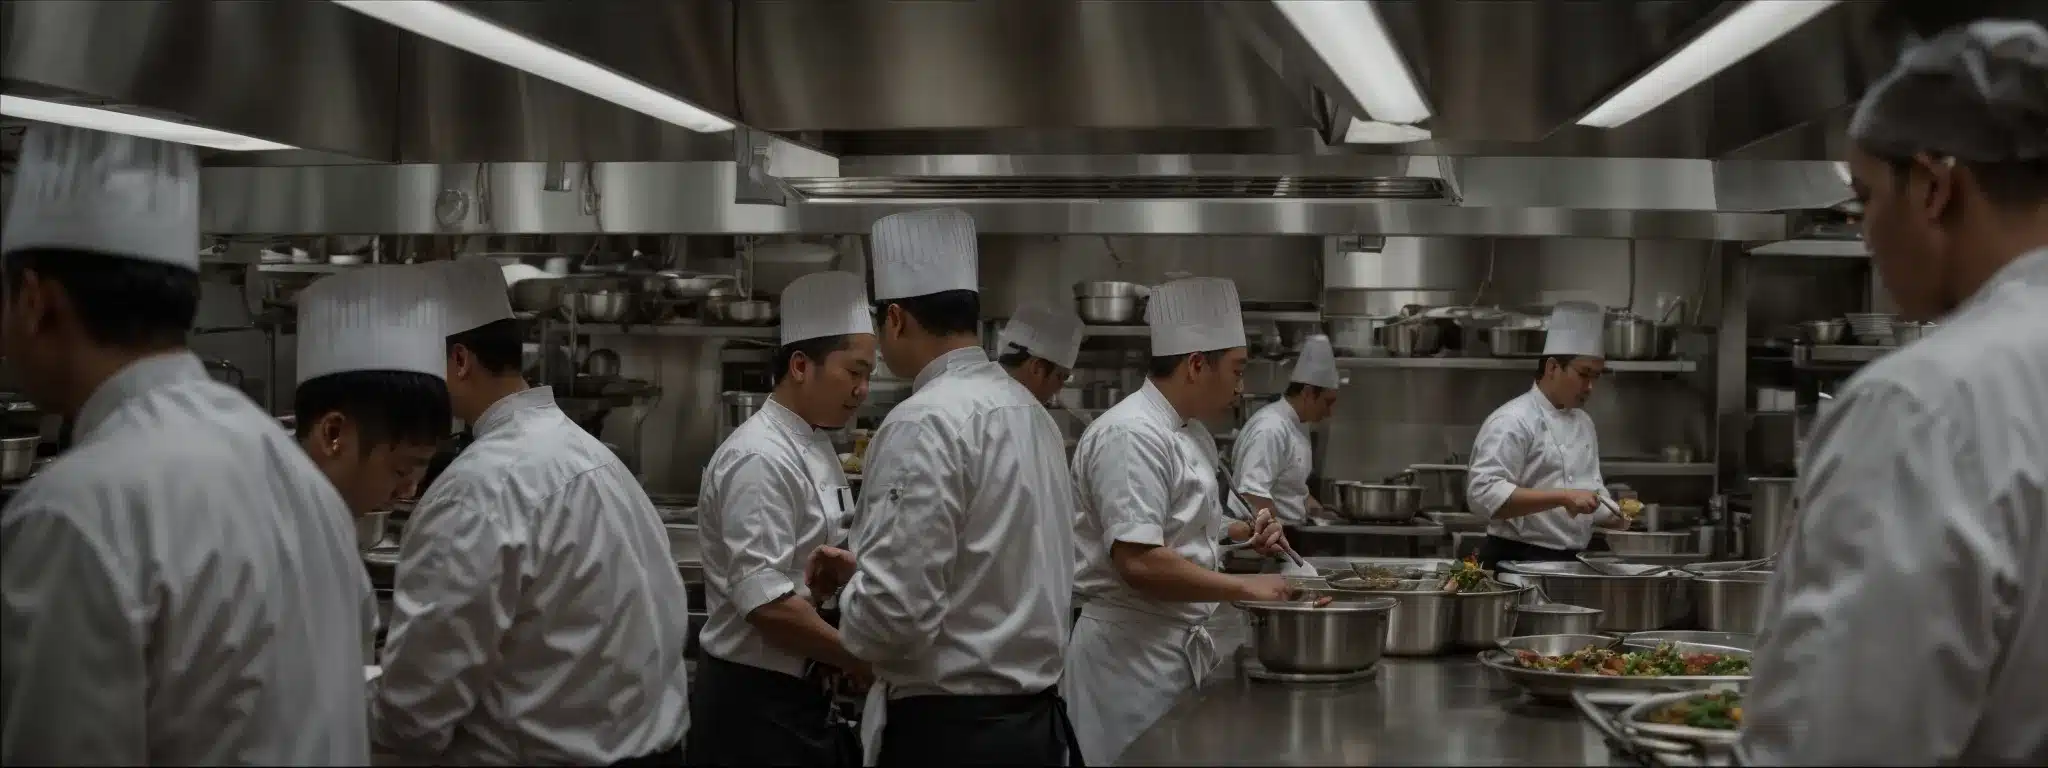 A Bustling Restaurant Kitchen Where Chefs Are Orchestrating A Variety Of Dishes In Harmony.